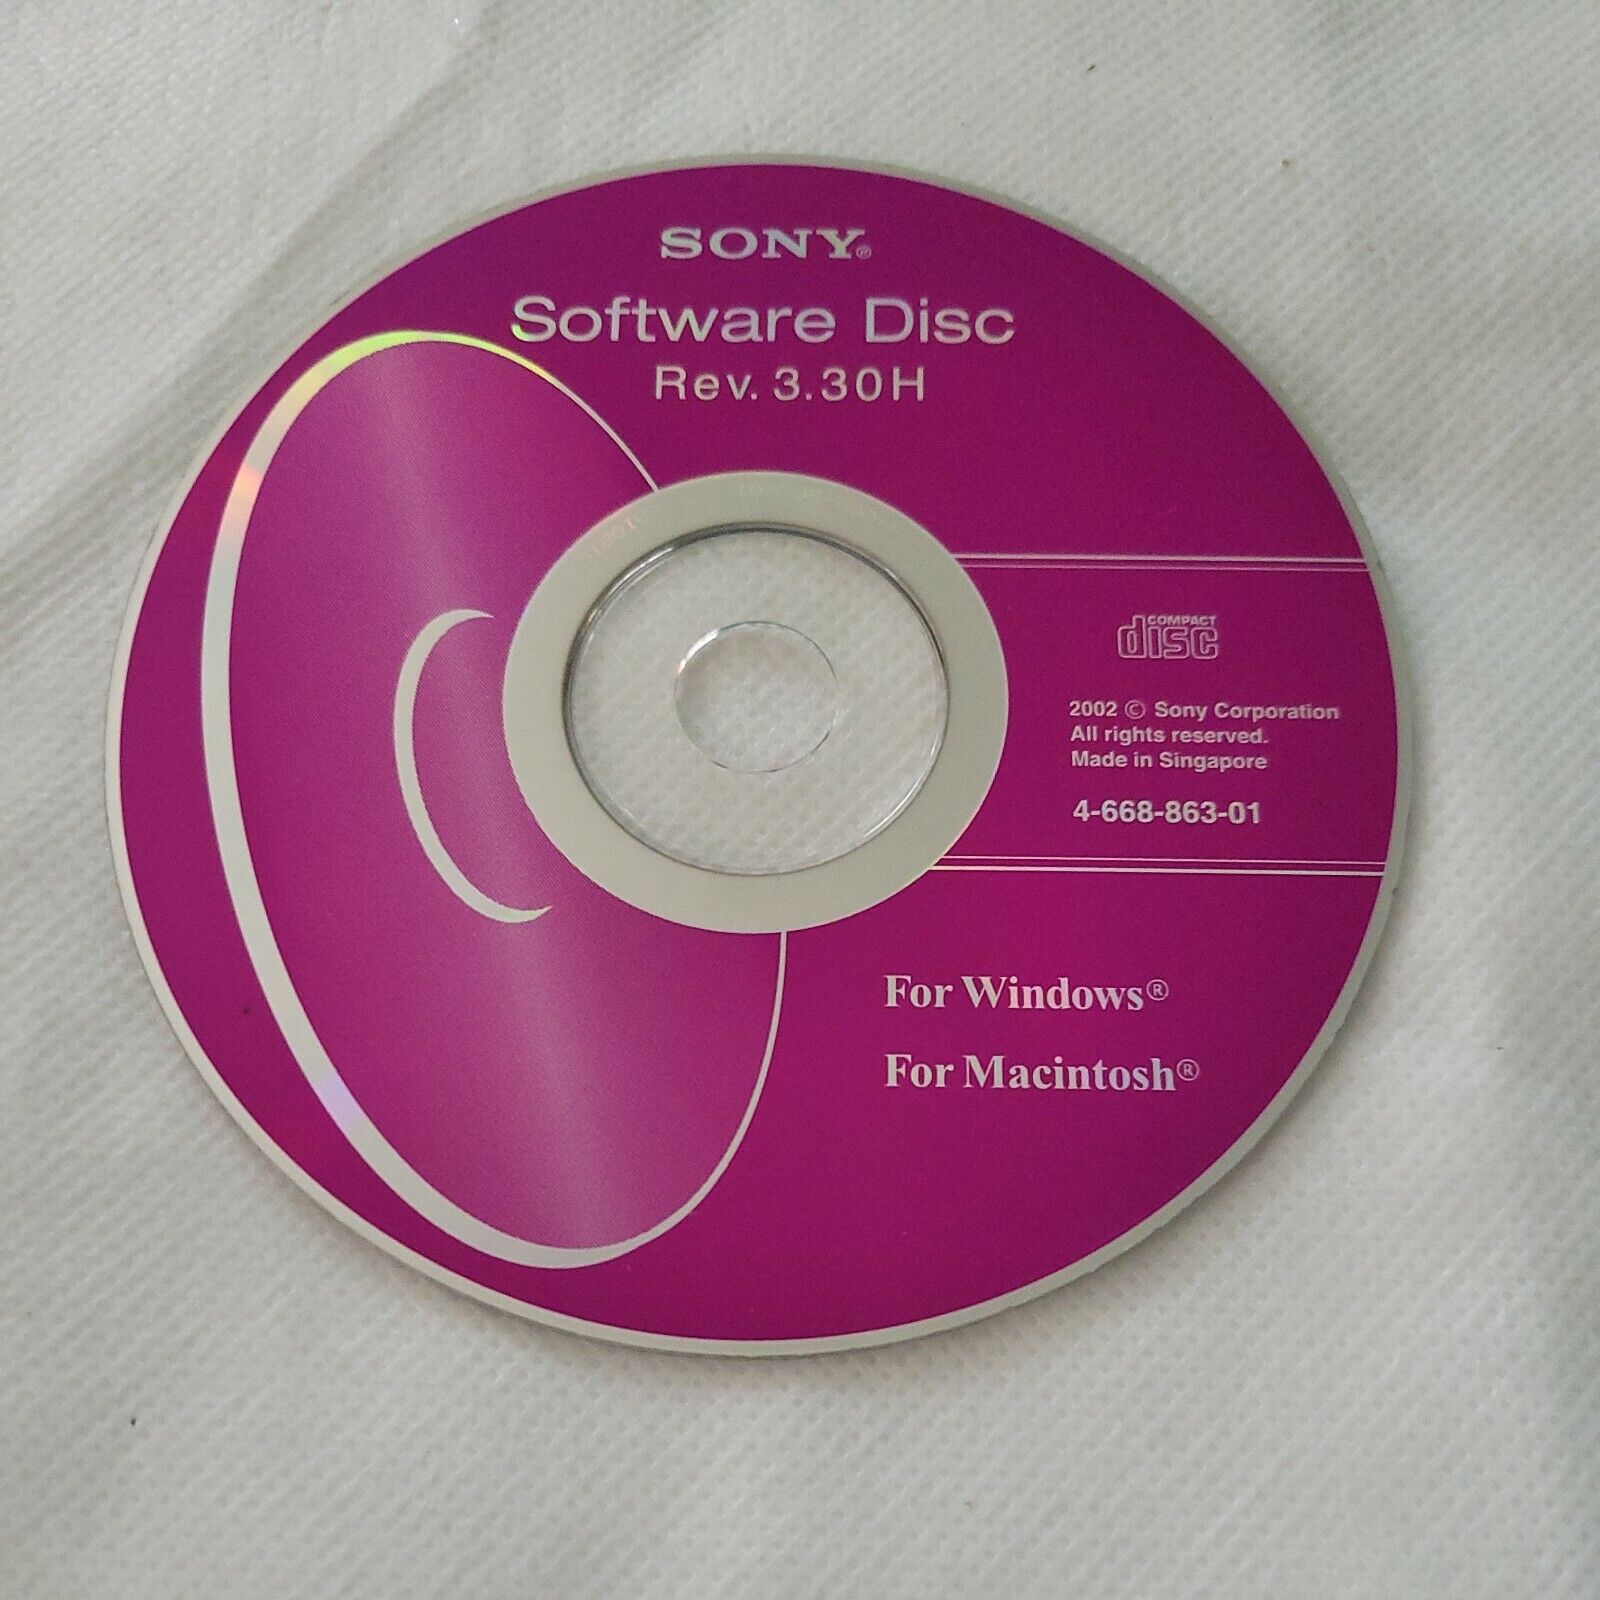 Sony Software Disc Rev. 3.30H Windows 2002 CD Macintosh Replacement 4-668-863-01